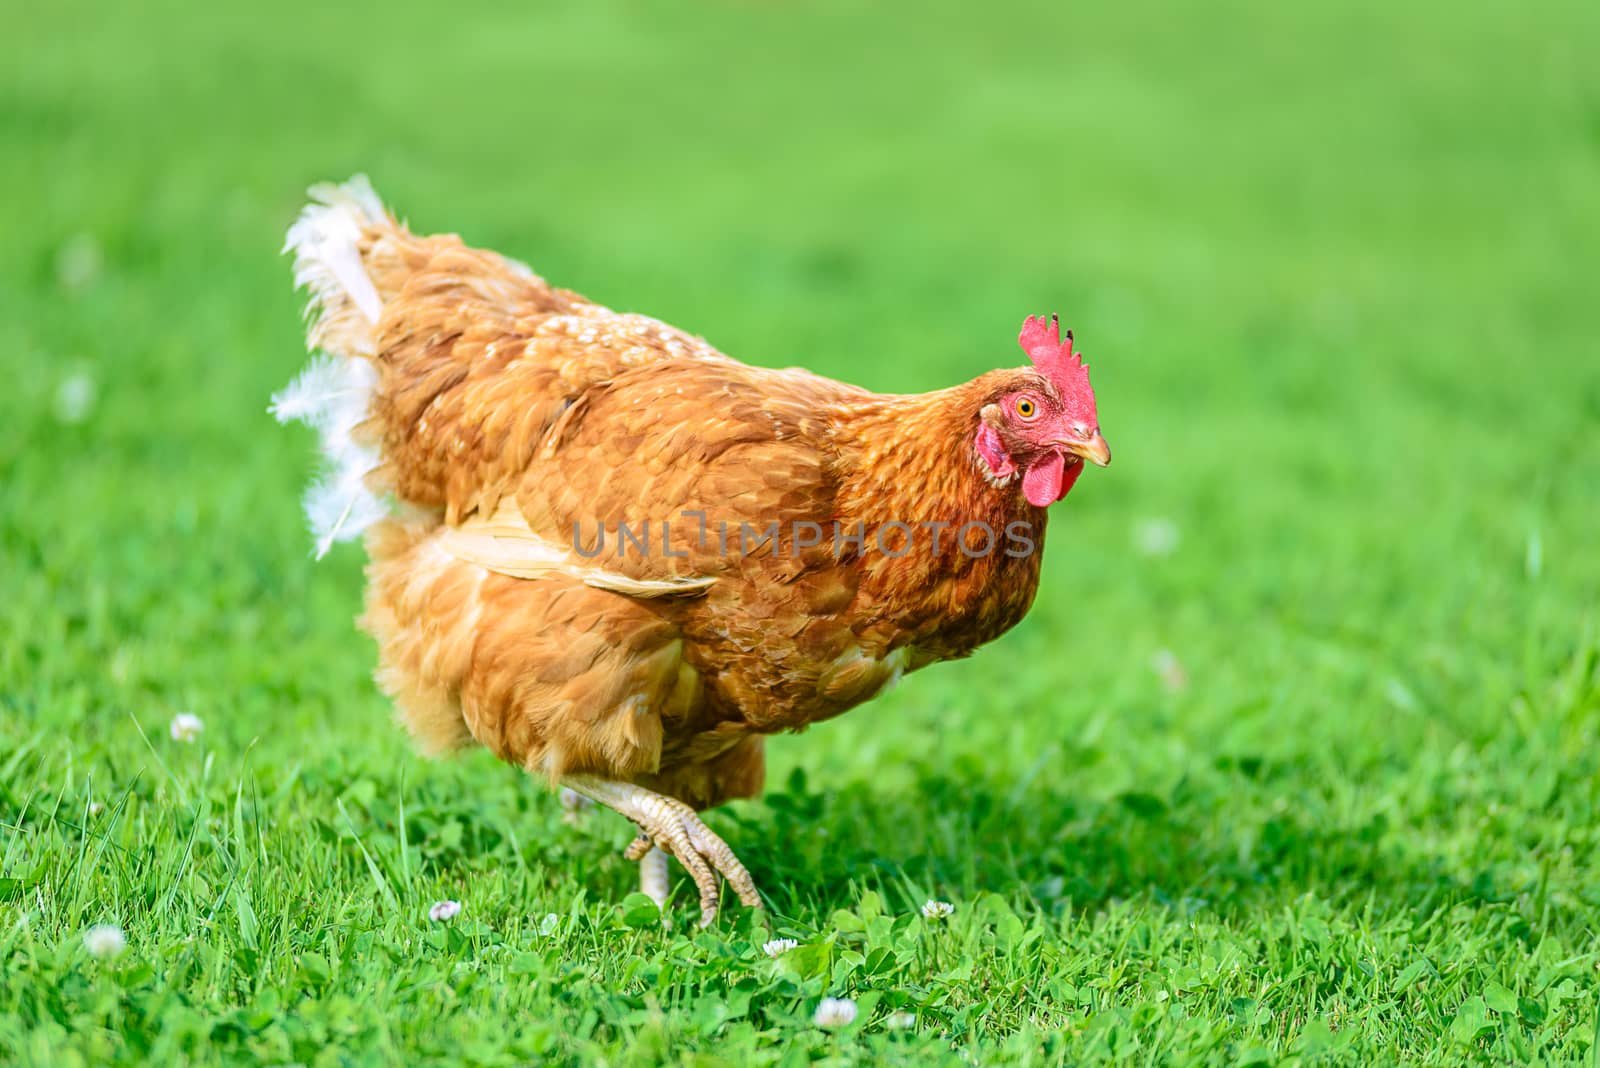 Hen on traditional free range poultry organic farm grazing on the grass.